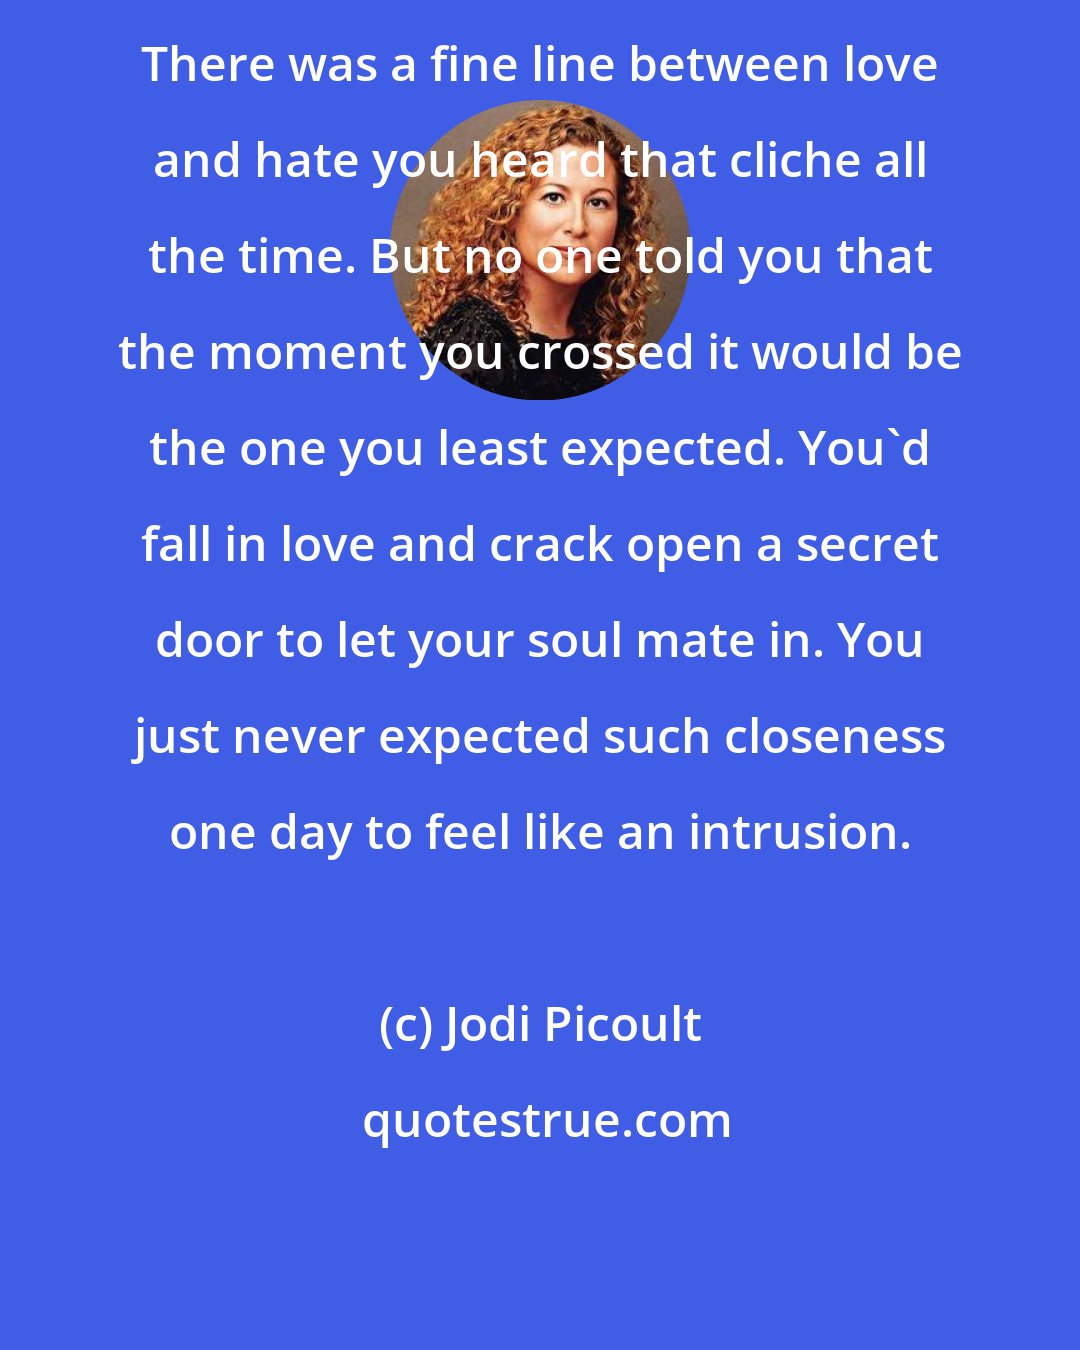 Jodi Picoult: There was a fine line between love and hate you heard that cliche all the time. But no one told you that the moment you crossed it would be the one you least expected. You'd fall in love and crack open a secret door to let your soul mate in. You just never expected such closeness one day to feel like an intrusion.